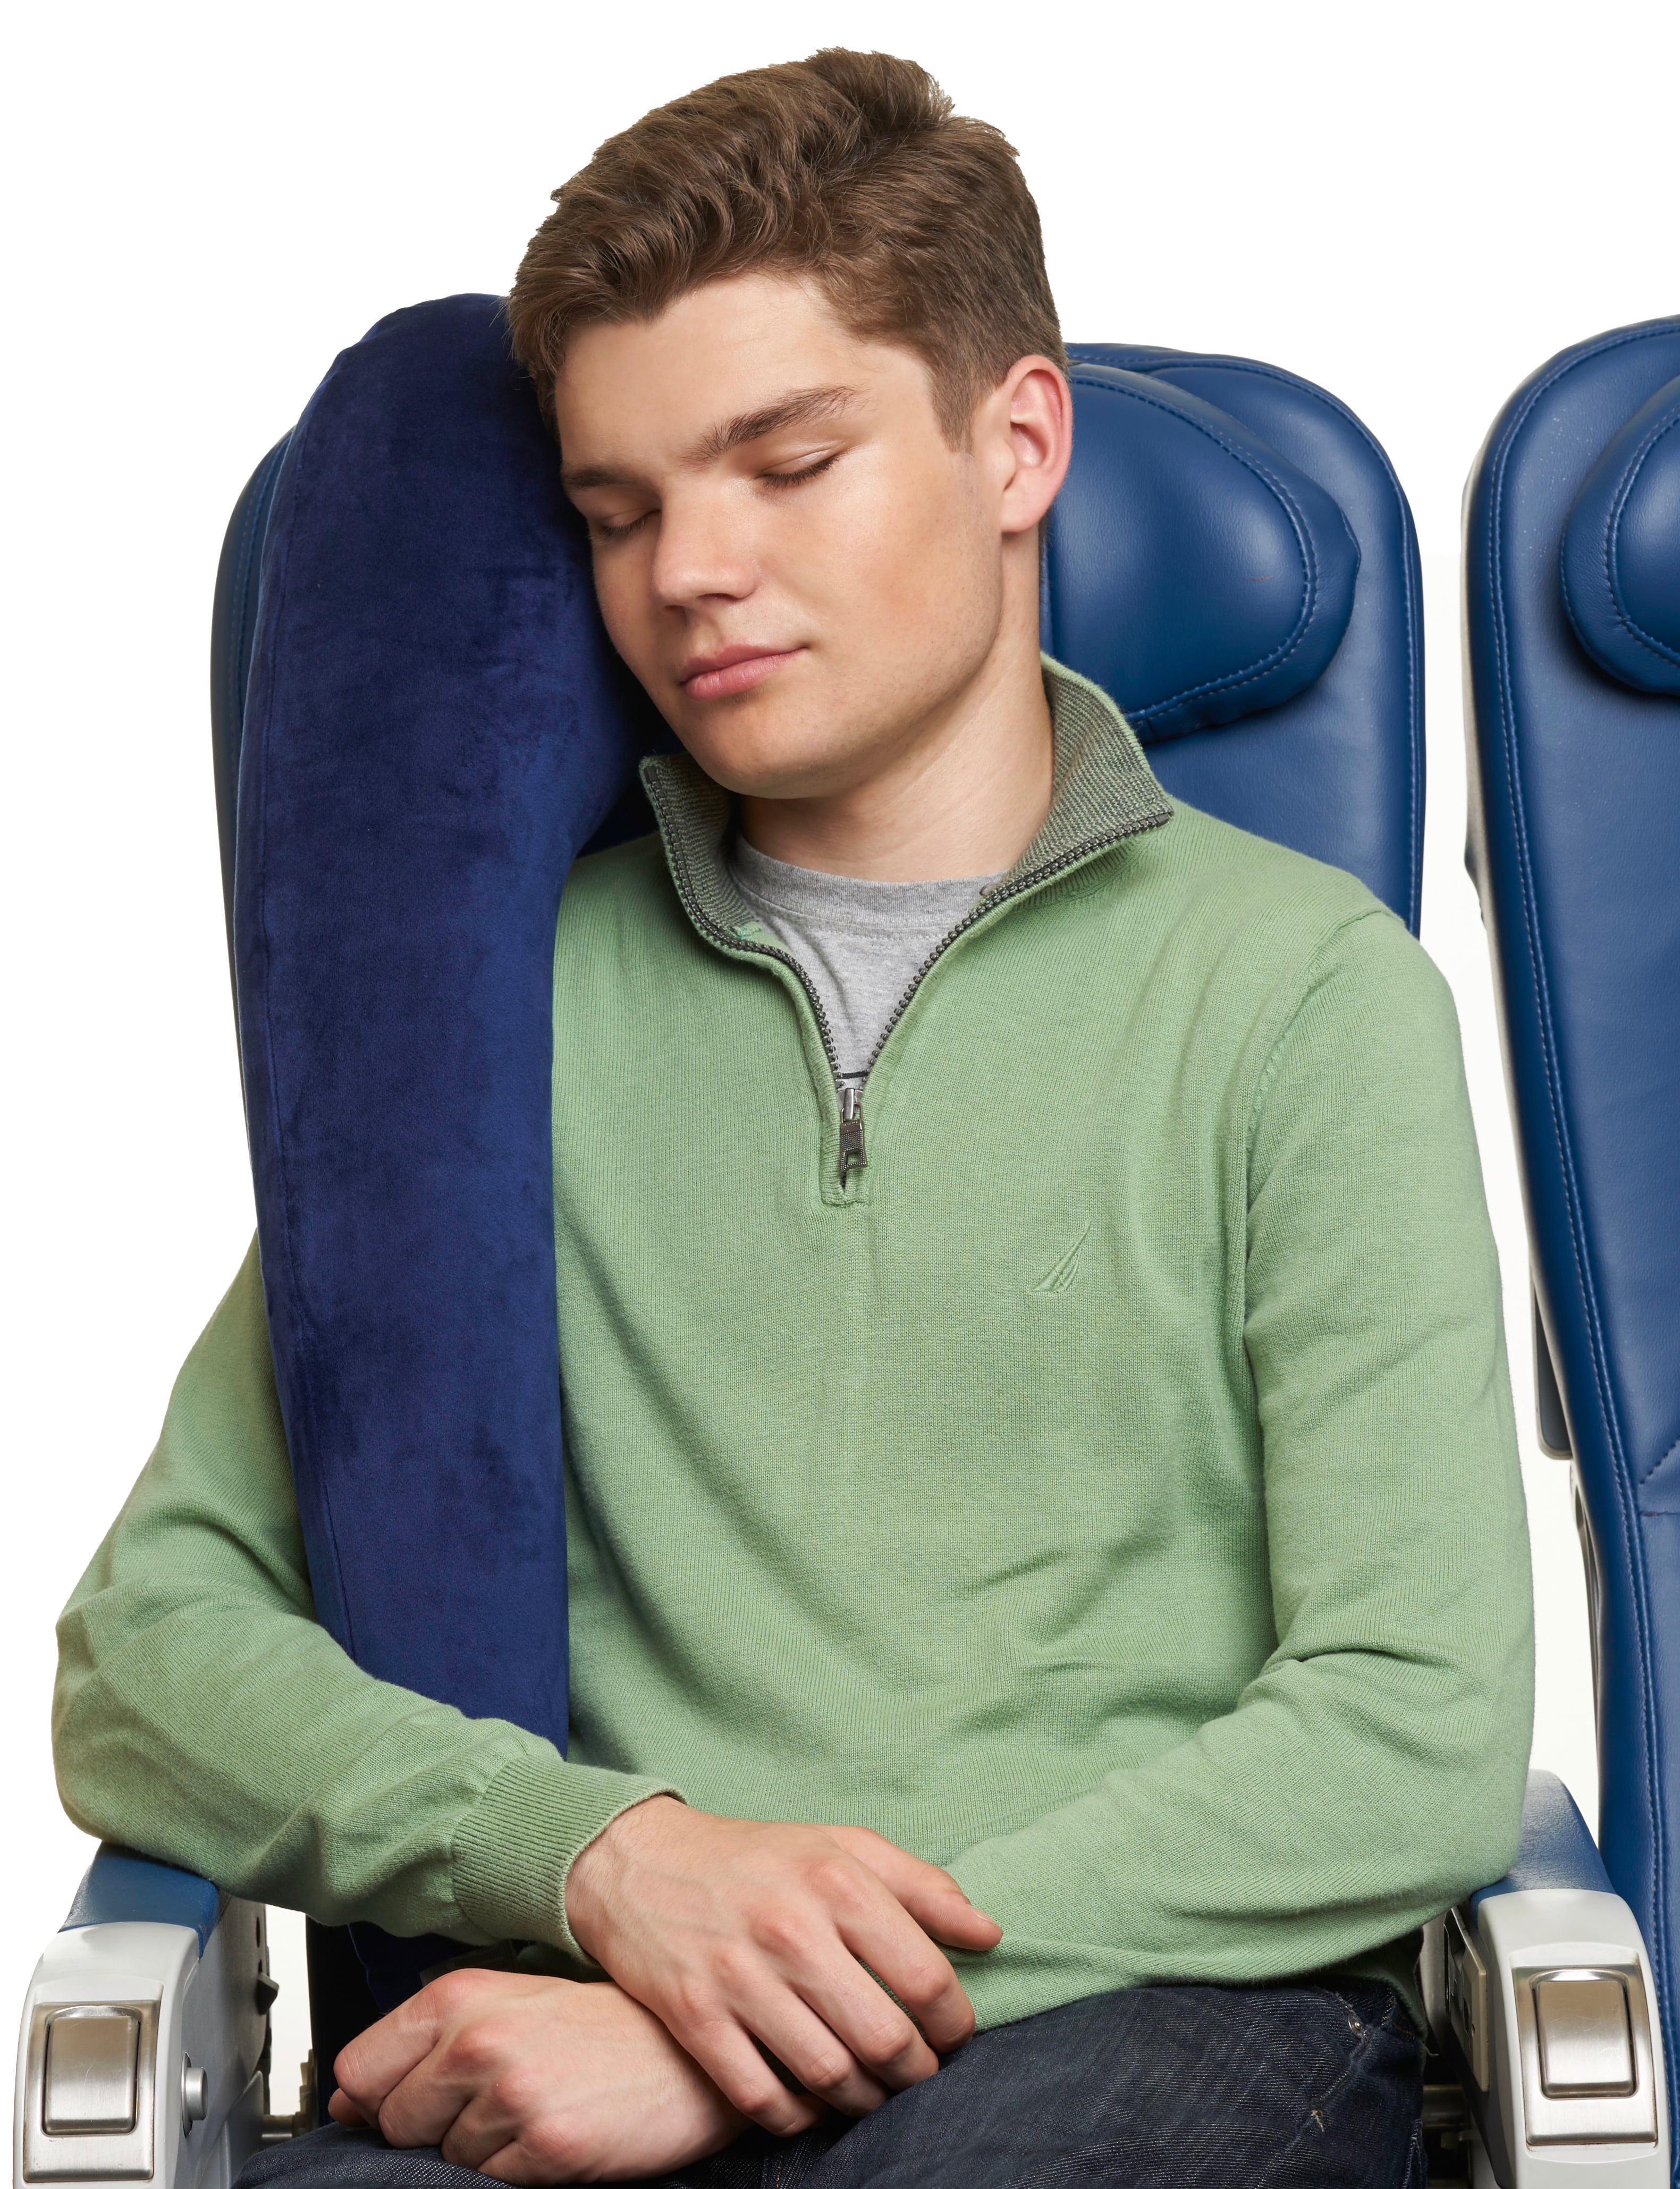 TRAVELREST Ultimate Travel, Neck & Body Pillow - Strap to Plane & Car Seat  - Compact, Comfort and Convenient for Office Napping, Airplane, Bus & Train